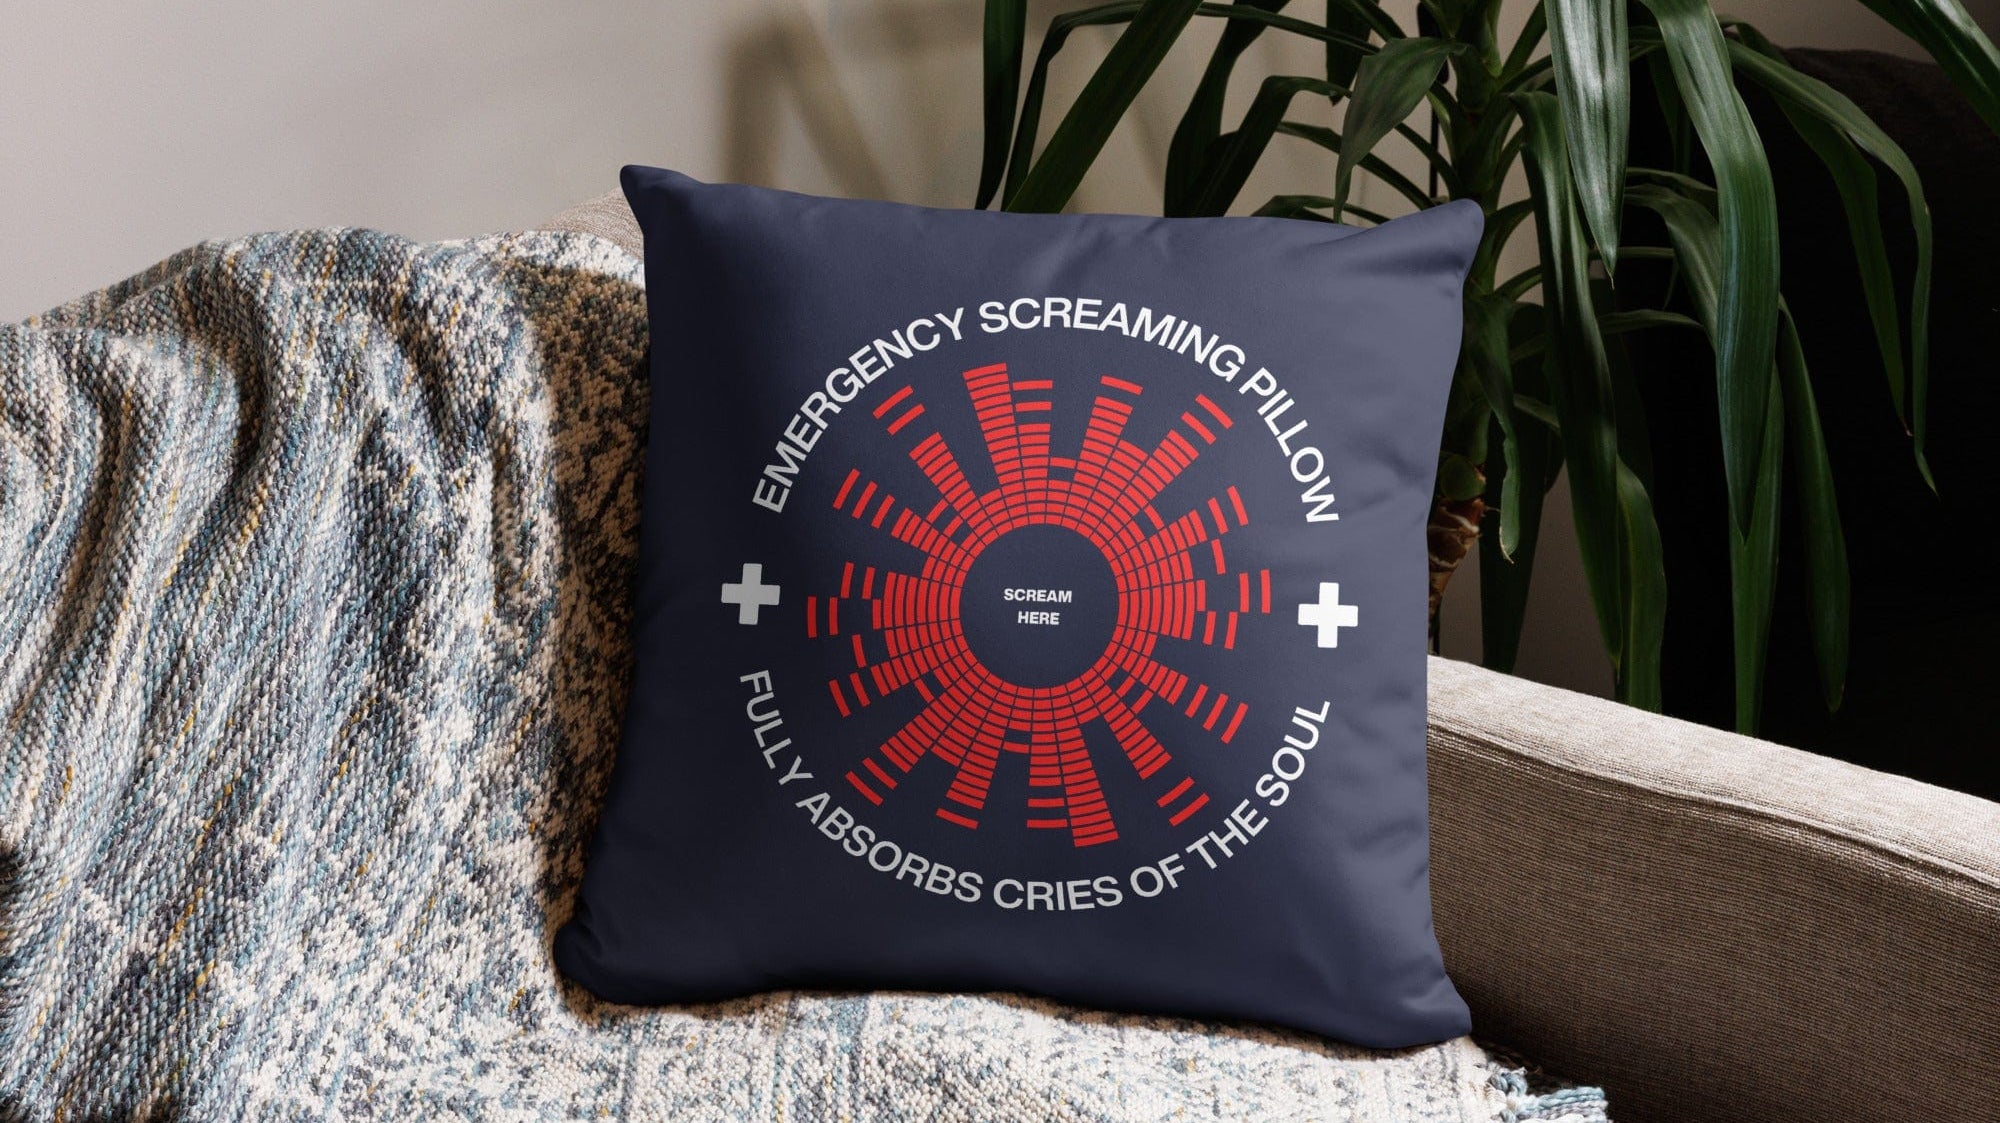 Emergency Screaming Pillows = Comfort & Comic Relief